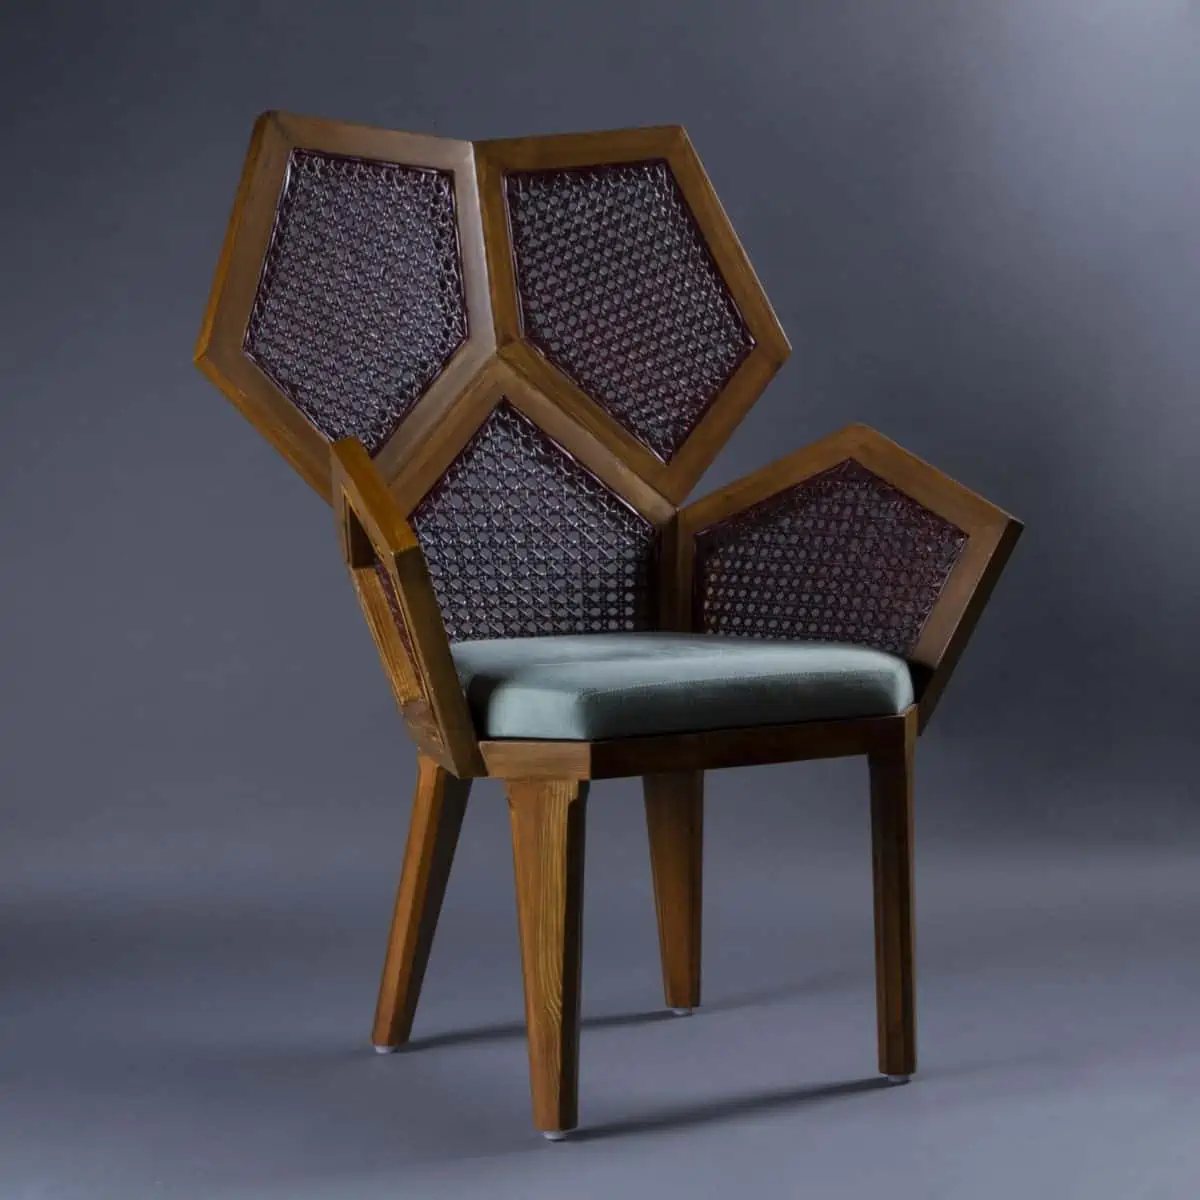 Wooden chair with blue cushioning and eccentric pentagon design